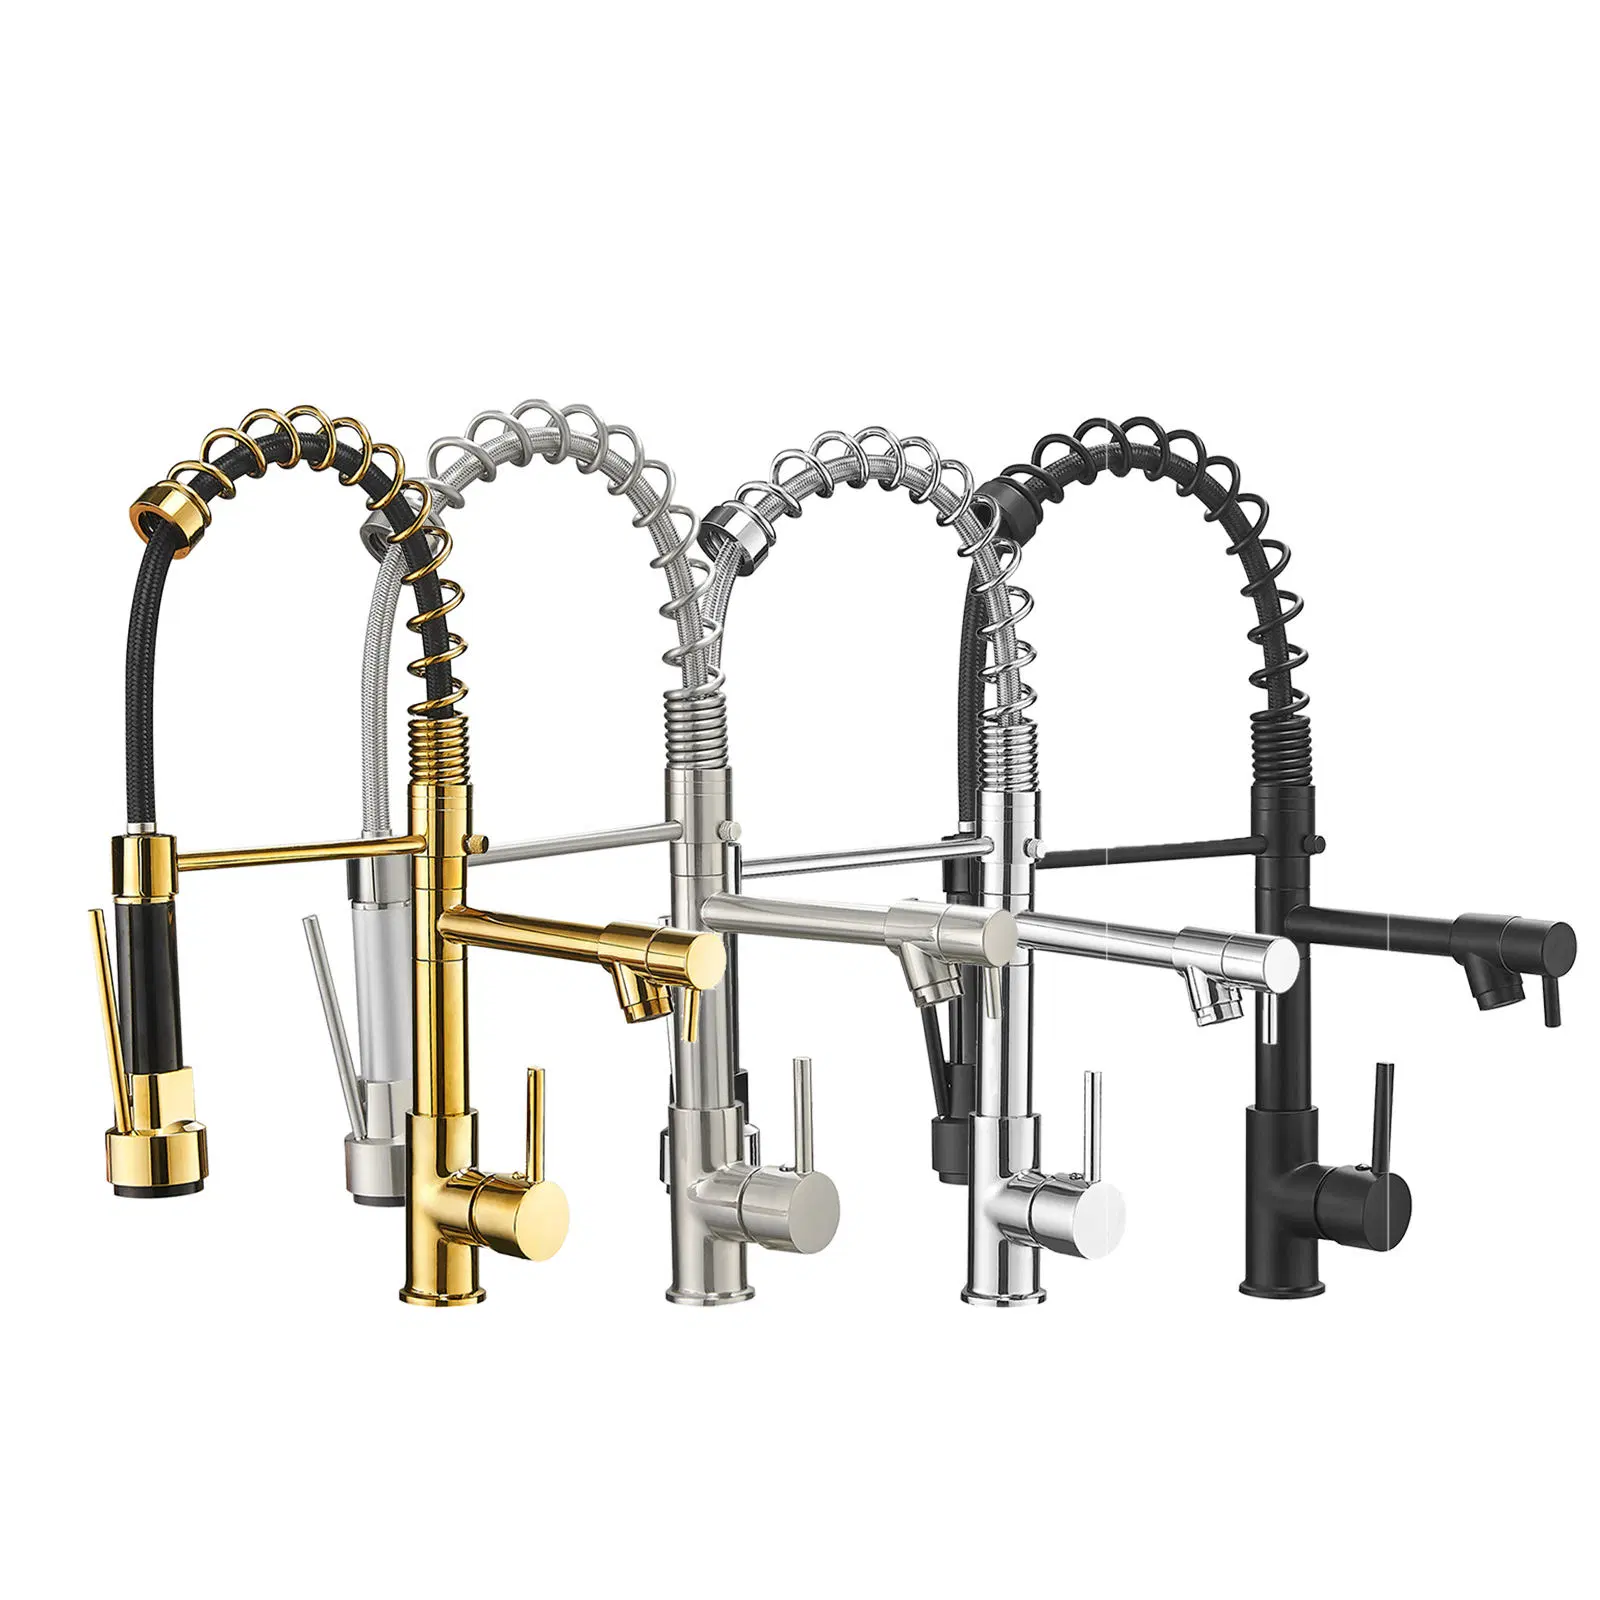 Brass Sinks Mixer Water Faucet Tap Manufacturer Single Handle Lever Pre-Rinse Spring Pull out Kitchen Sink Faucet Taps with Pull-Down Sprayer